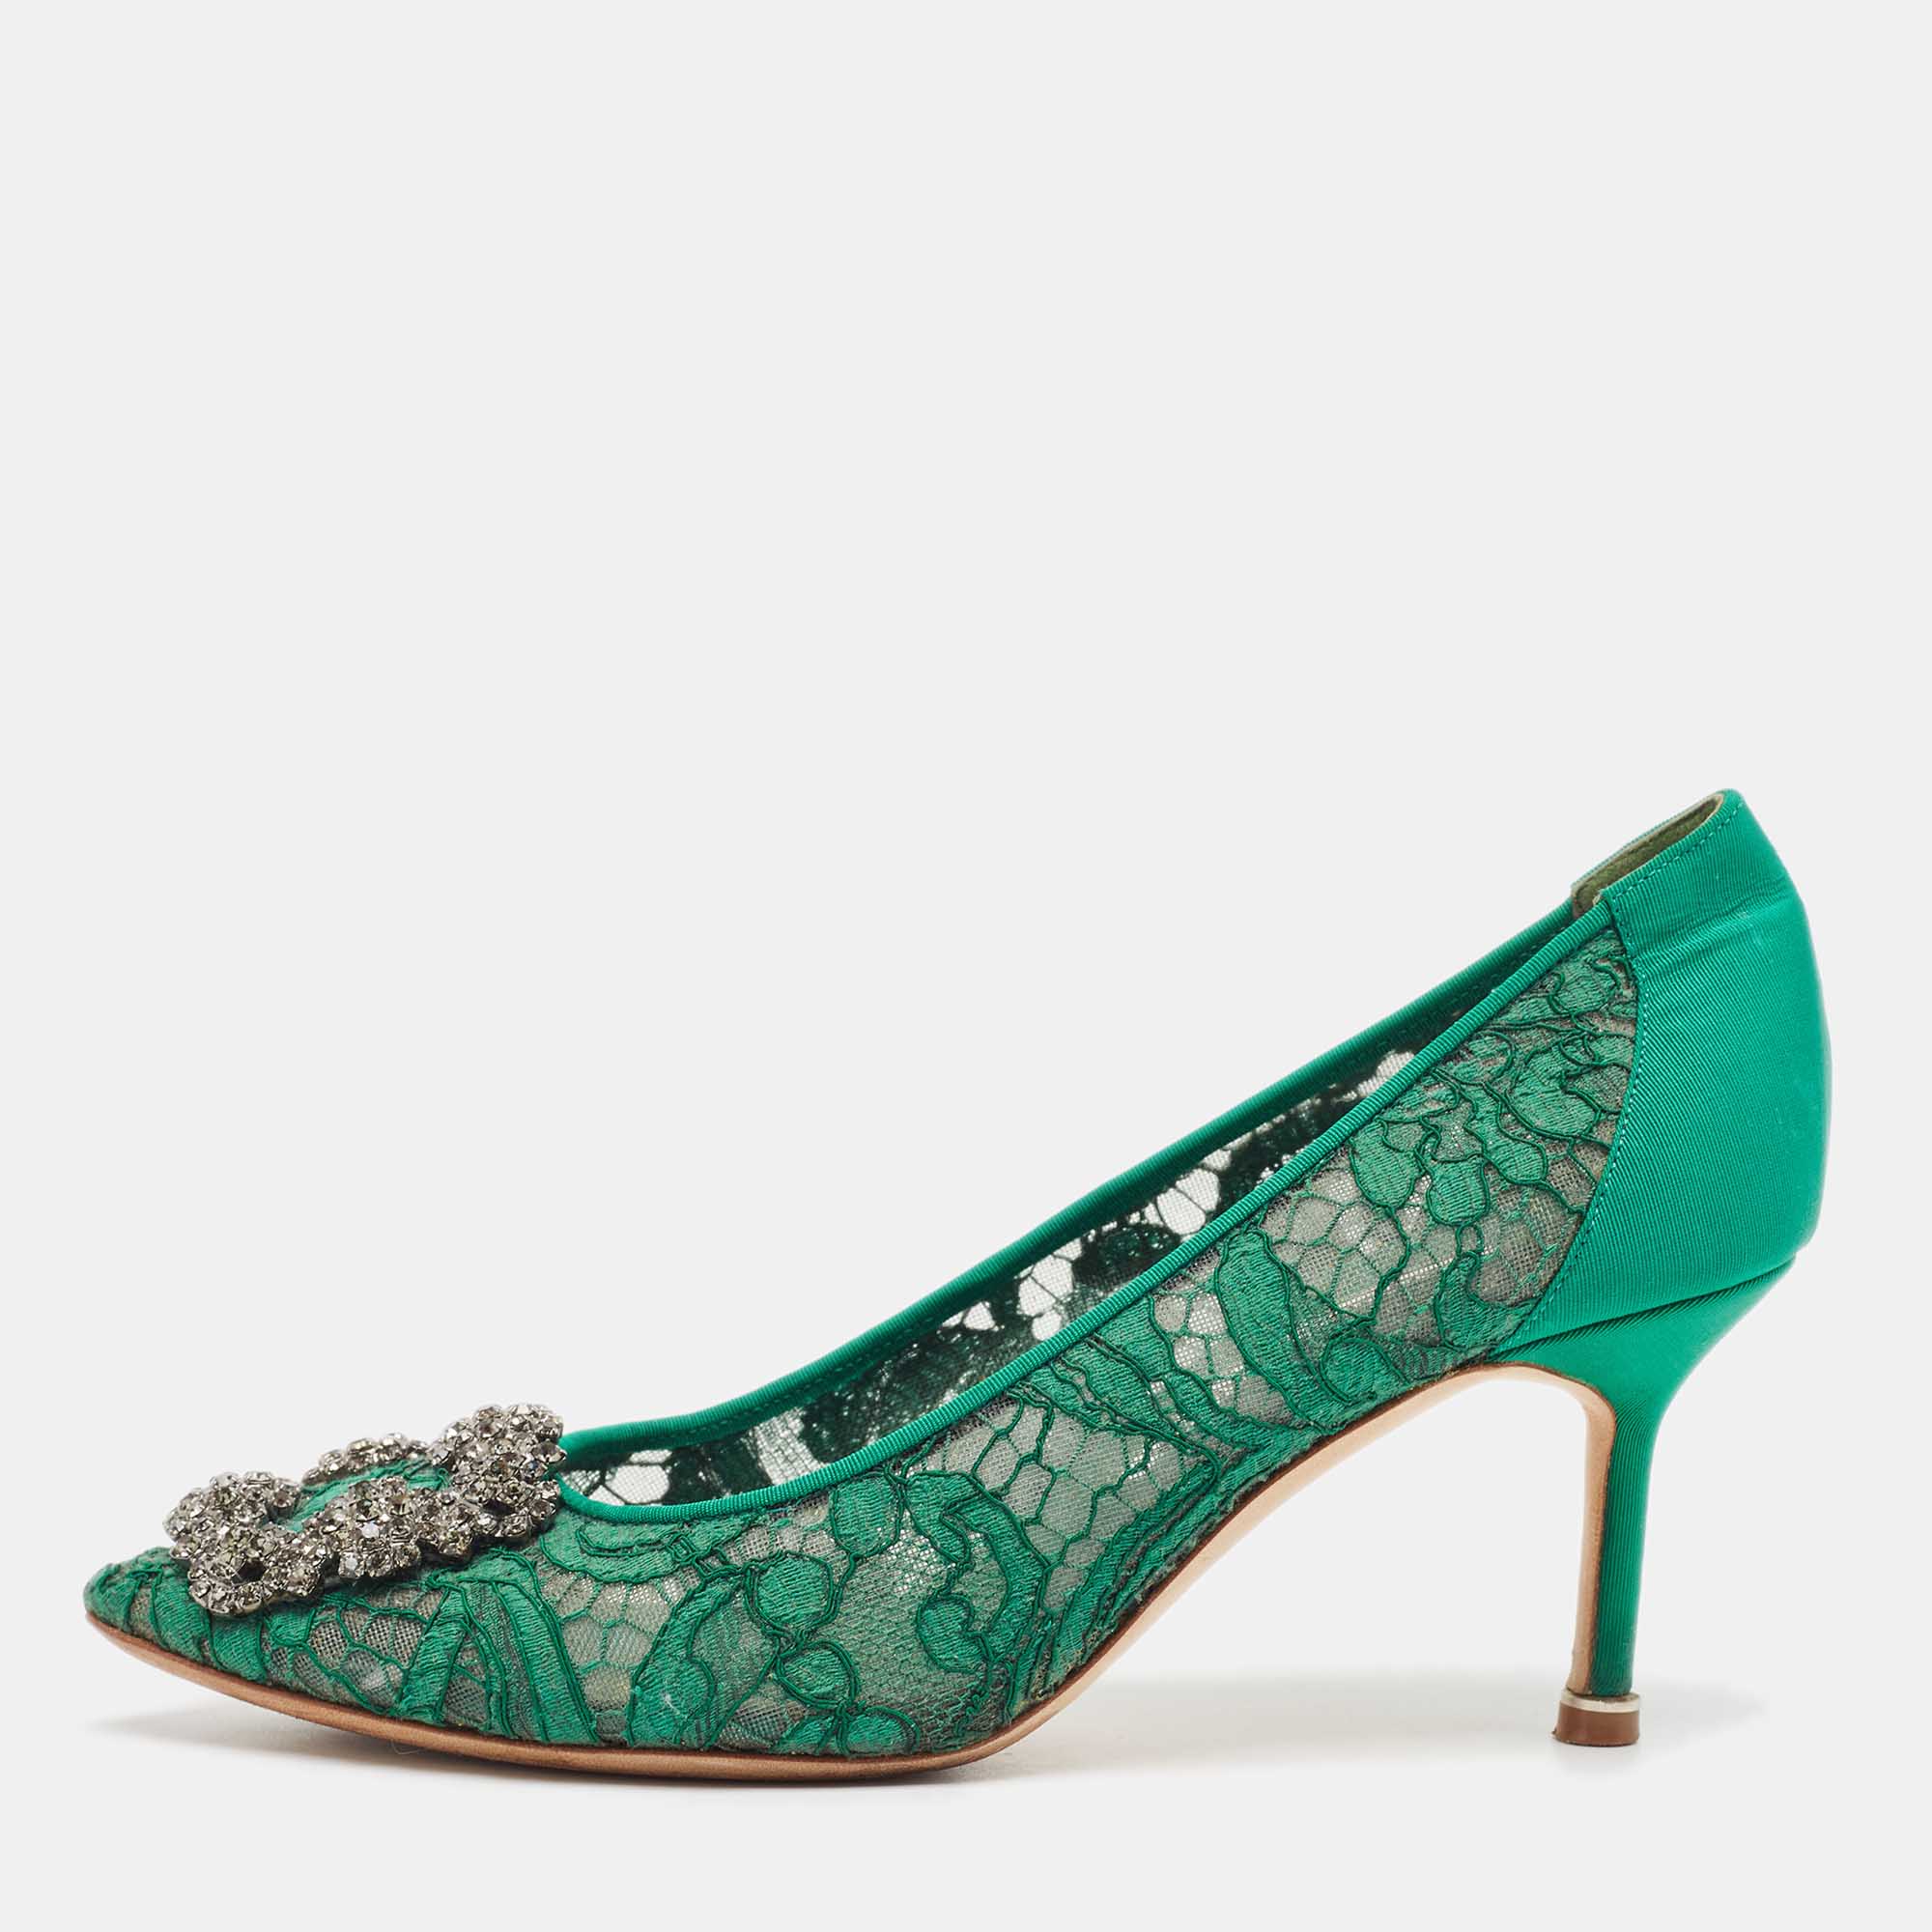 Pre-owned Manolo Blahnik Green Lace Hangisi Pumps Size 35.5